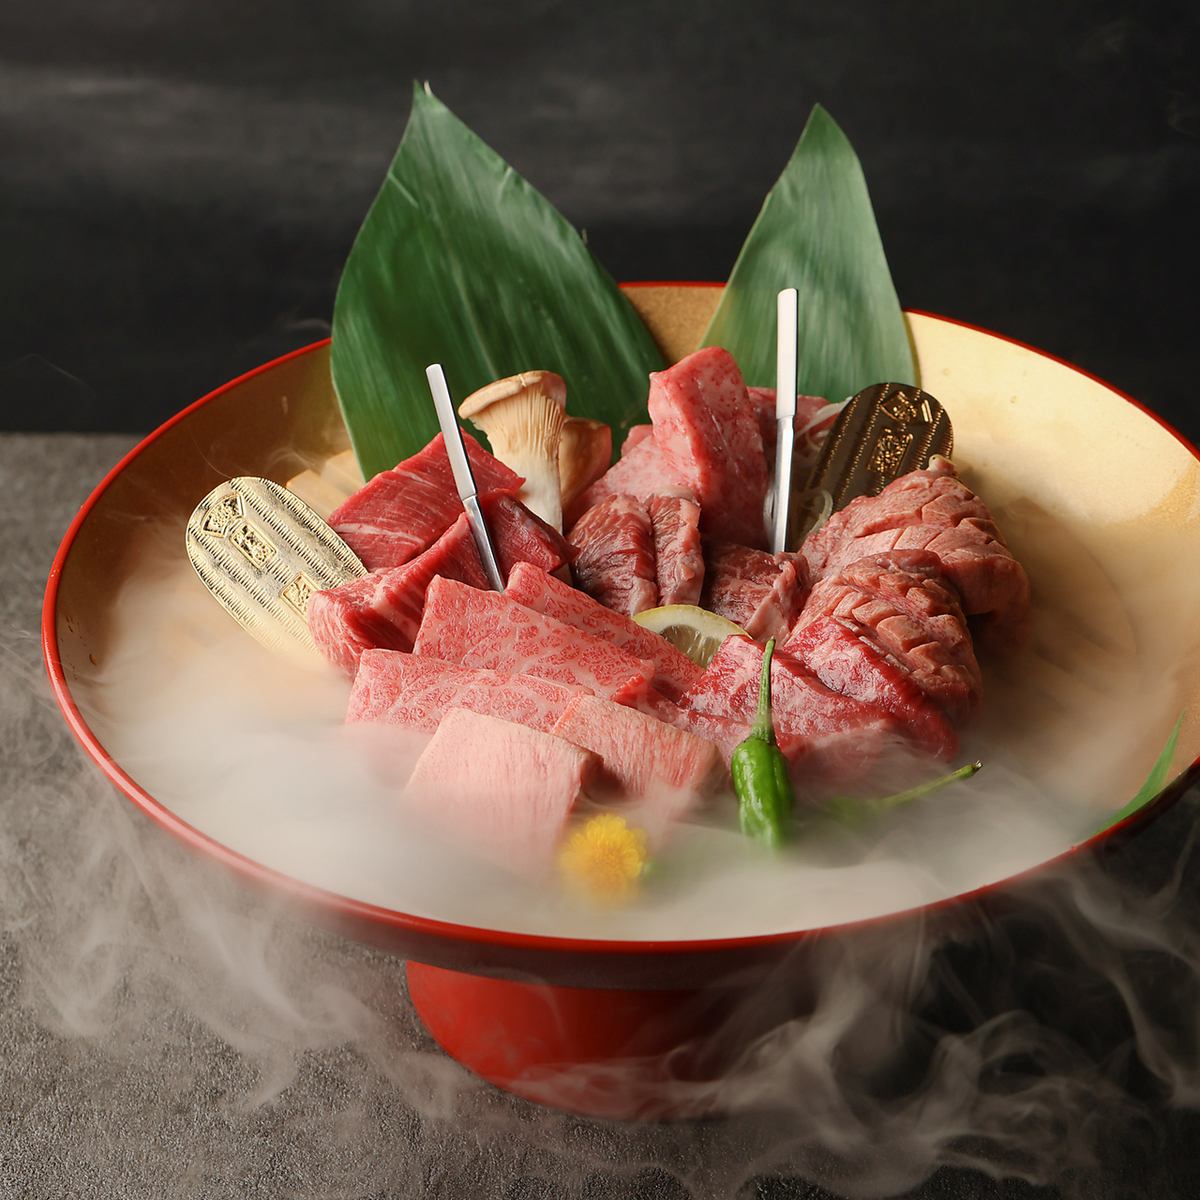 Enjoy a blissful yakiniku time with your loved ones at the Lab!